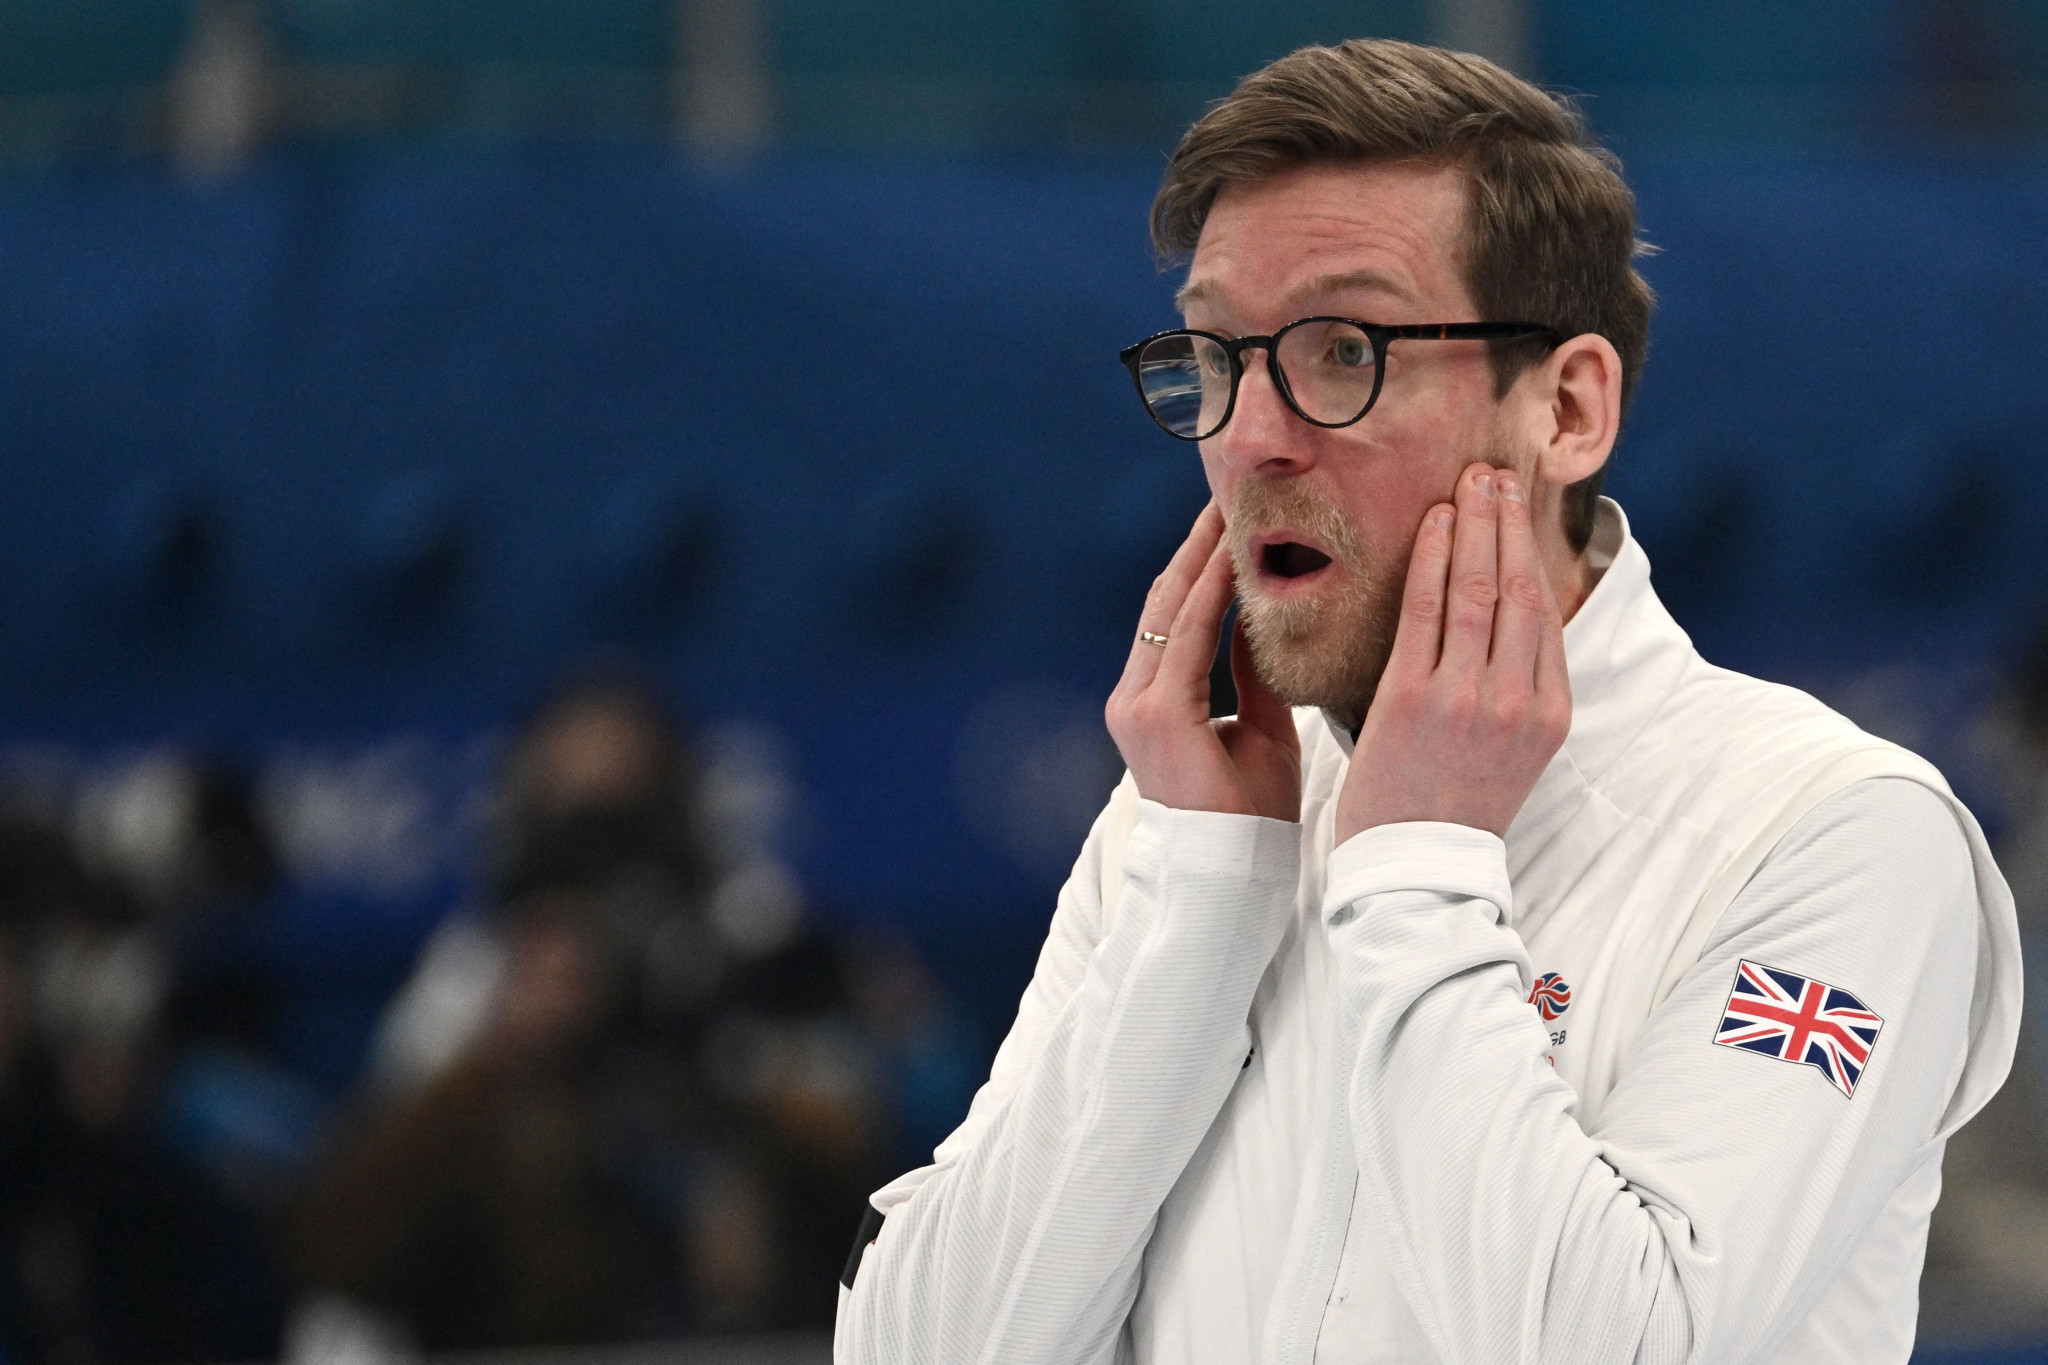 Coach Lindström moves on from Scotland to Hasselborg's Sweden rink for Milan Cortina 2026